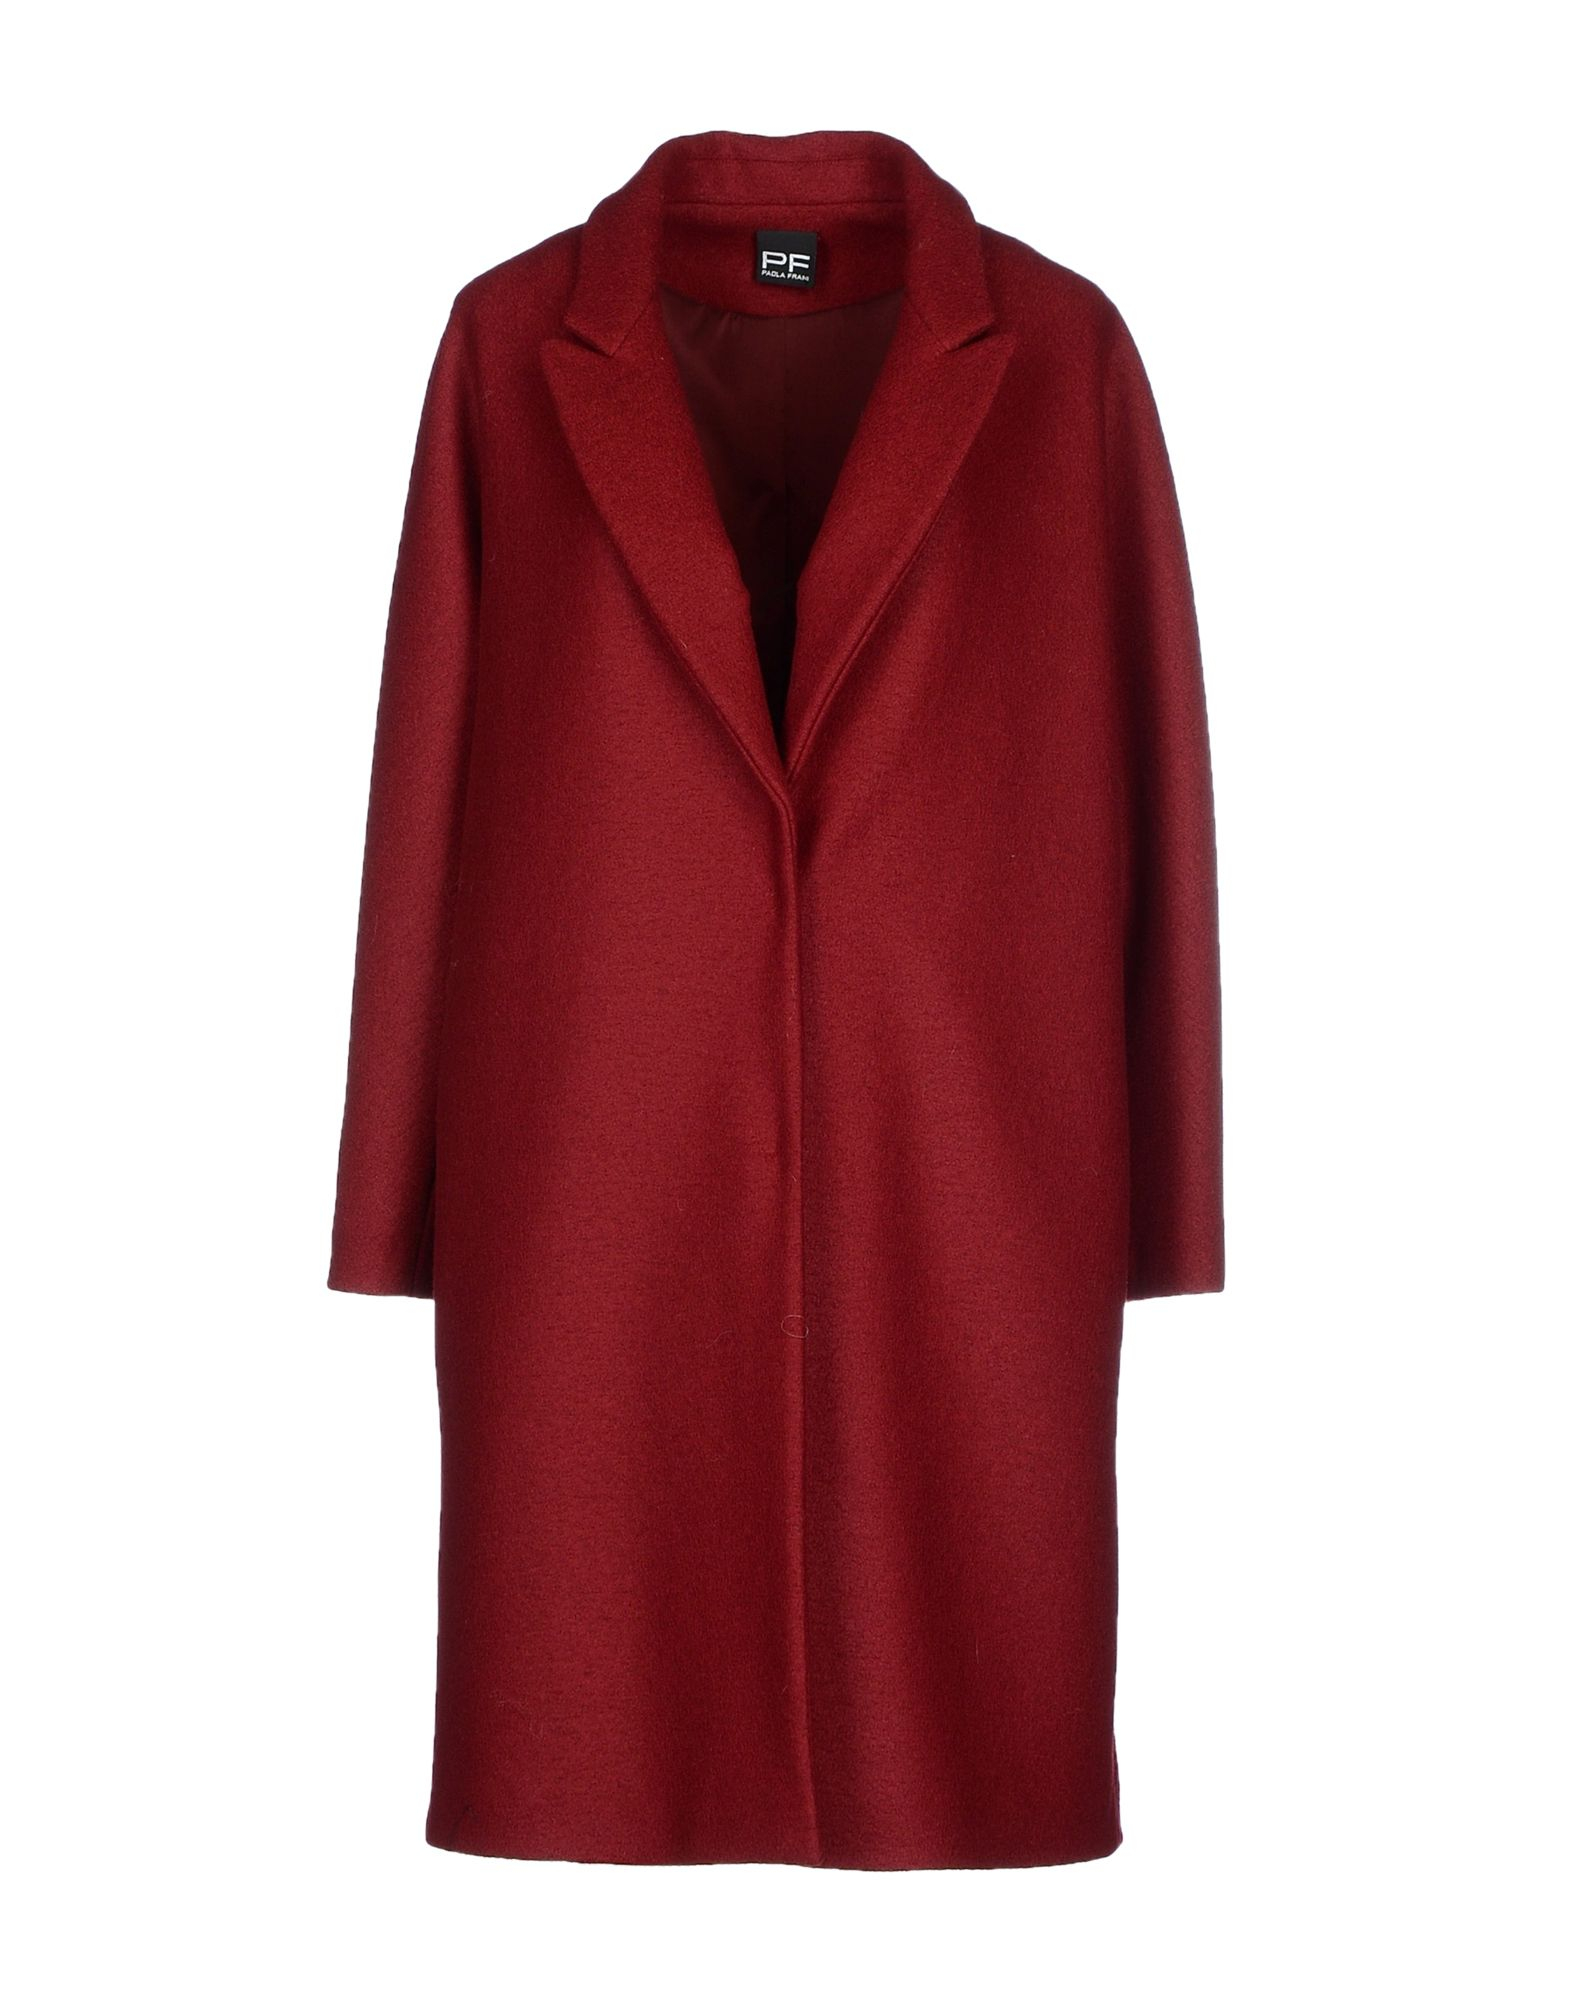 Pf Paola Frani Coat in Red - Lyst